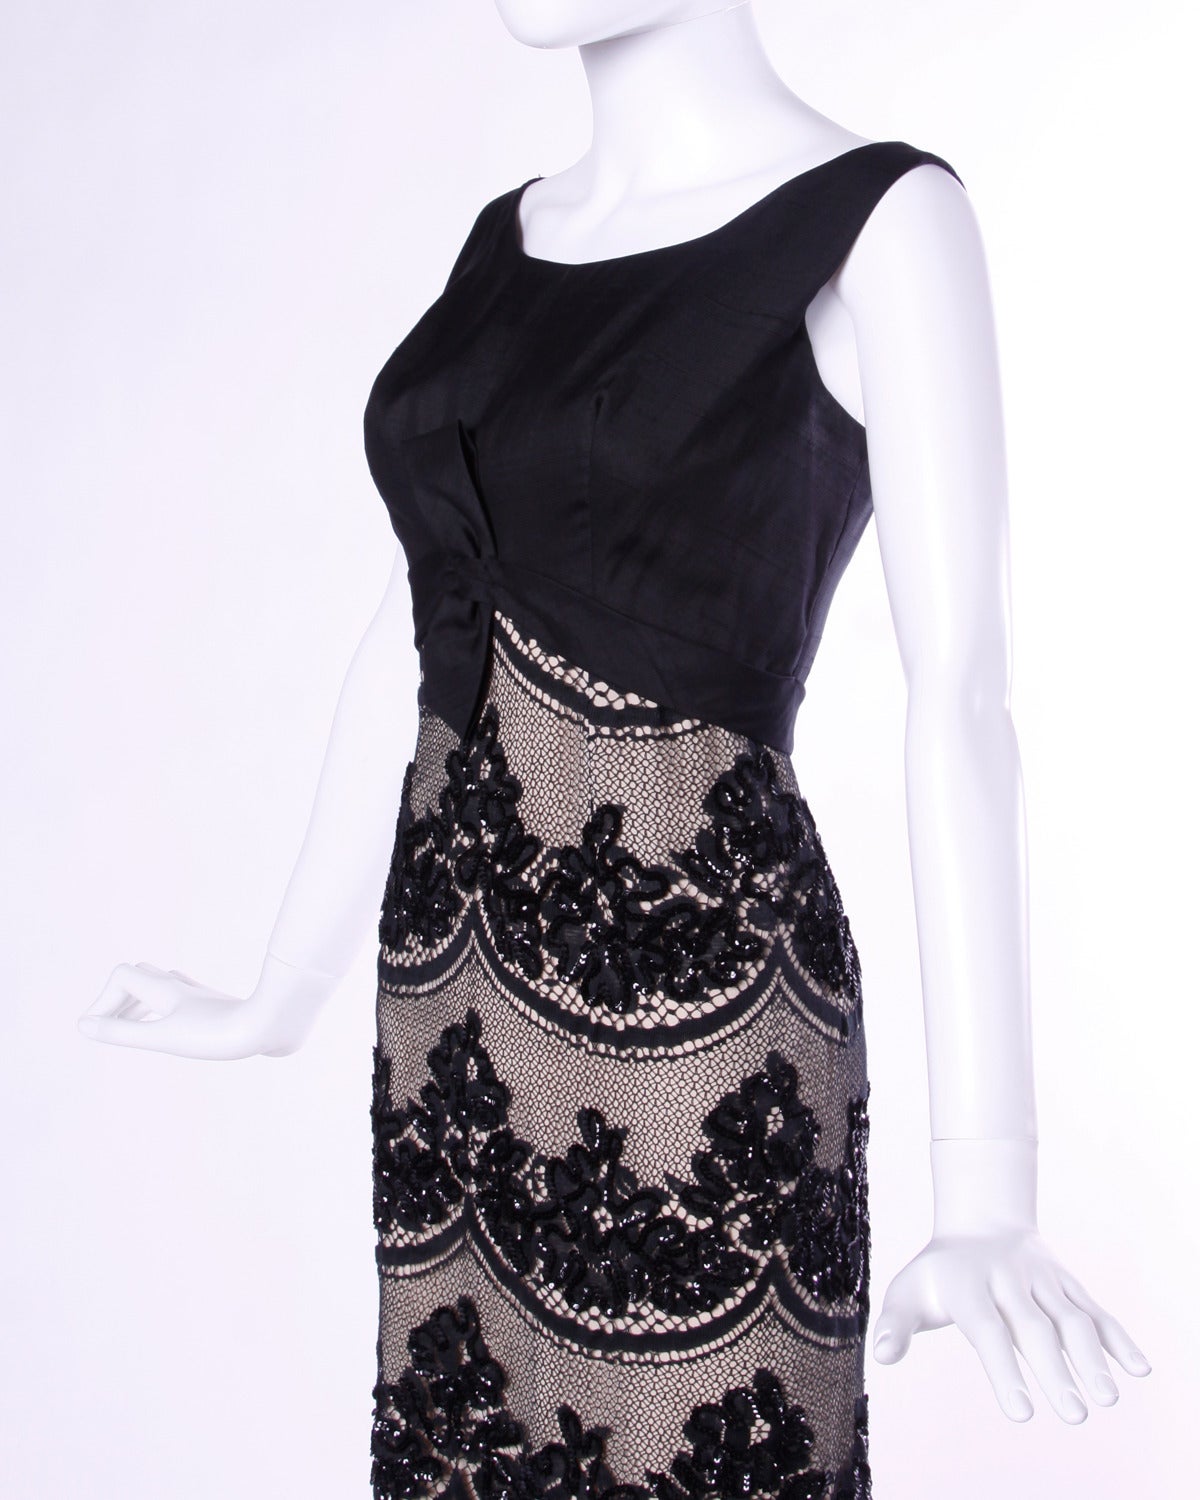 Vintage Emma Domb cocktail dress in black scalloped lace with beadwork. Empire waist with bow detail in front.

Details:

Fully Lined
Back Zip and Hook Closure
Marked Size: 14
Estimated Size: S-M
Color: Black/ Creamy Beige
Fabric: Beaded